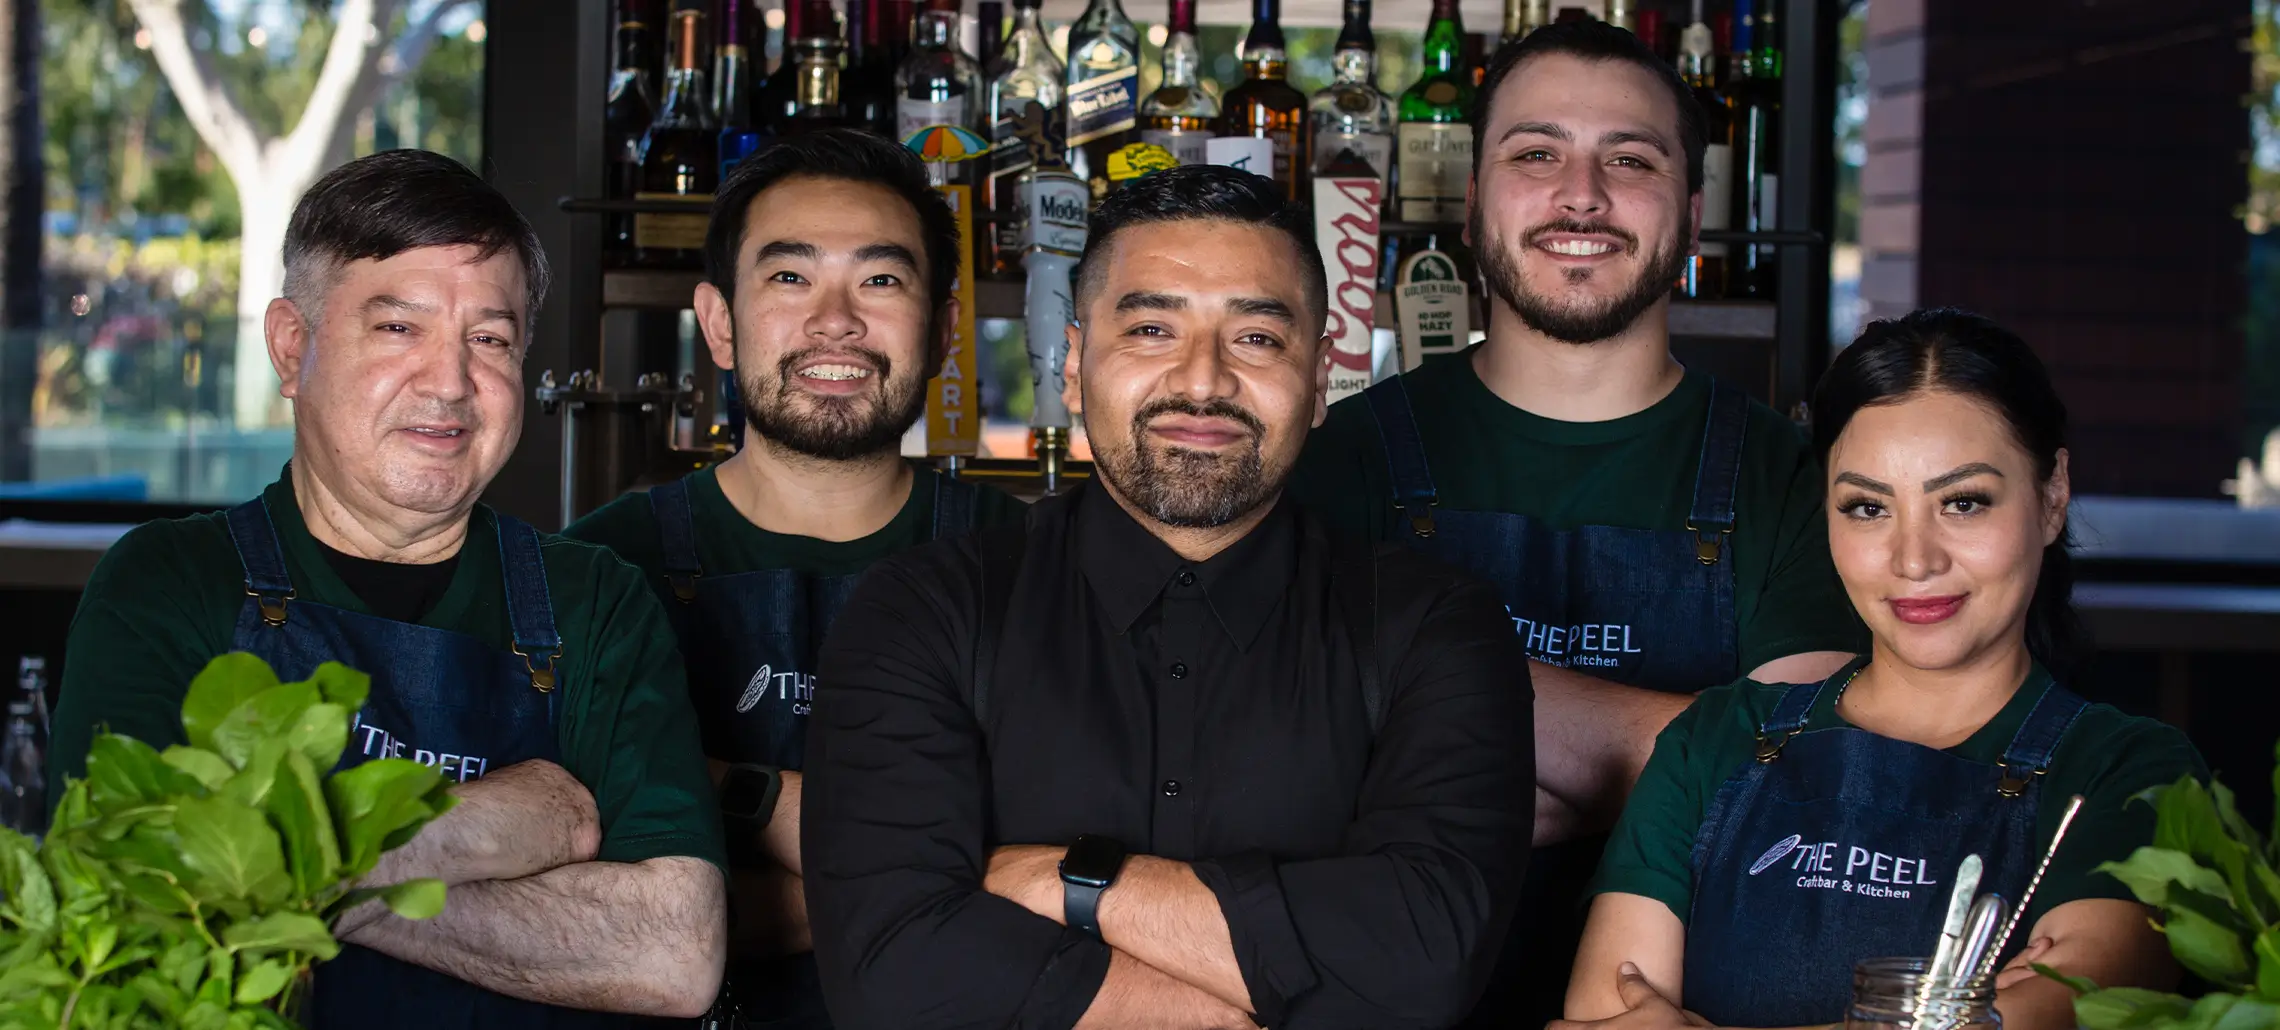 group of servers and bartenders pose together at the peel